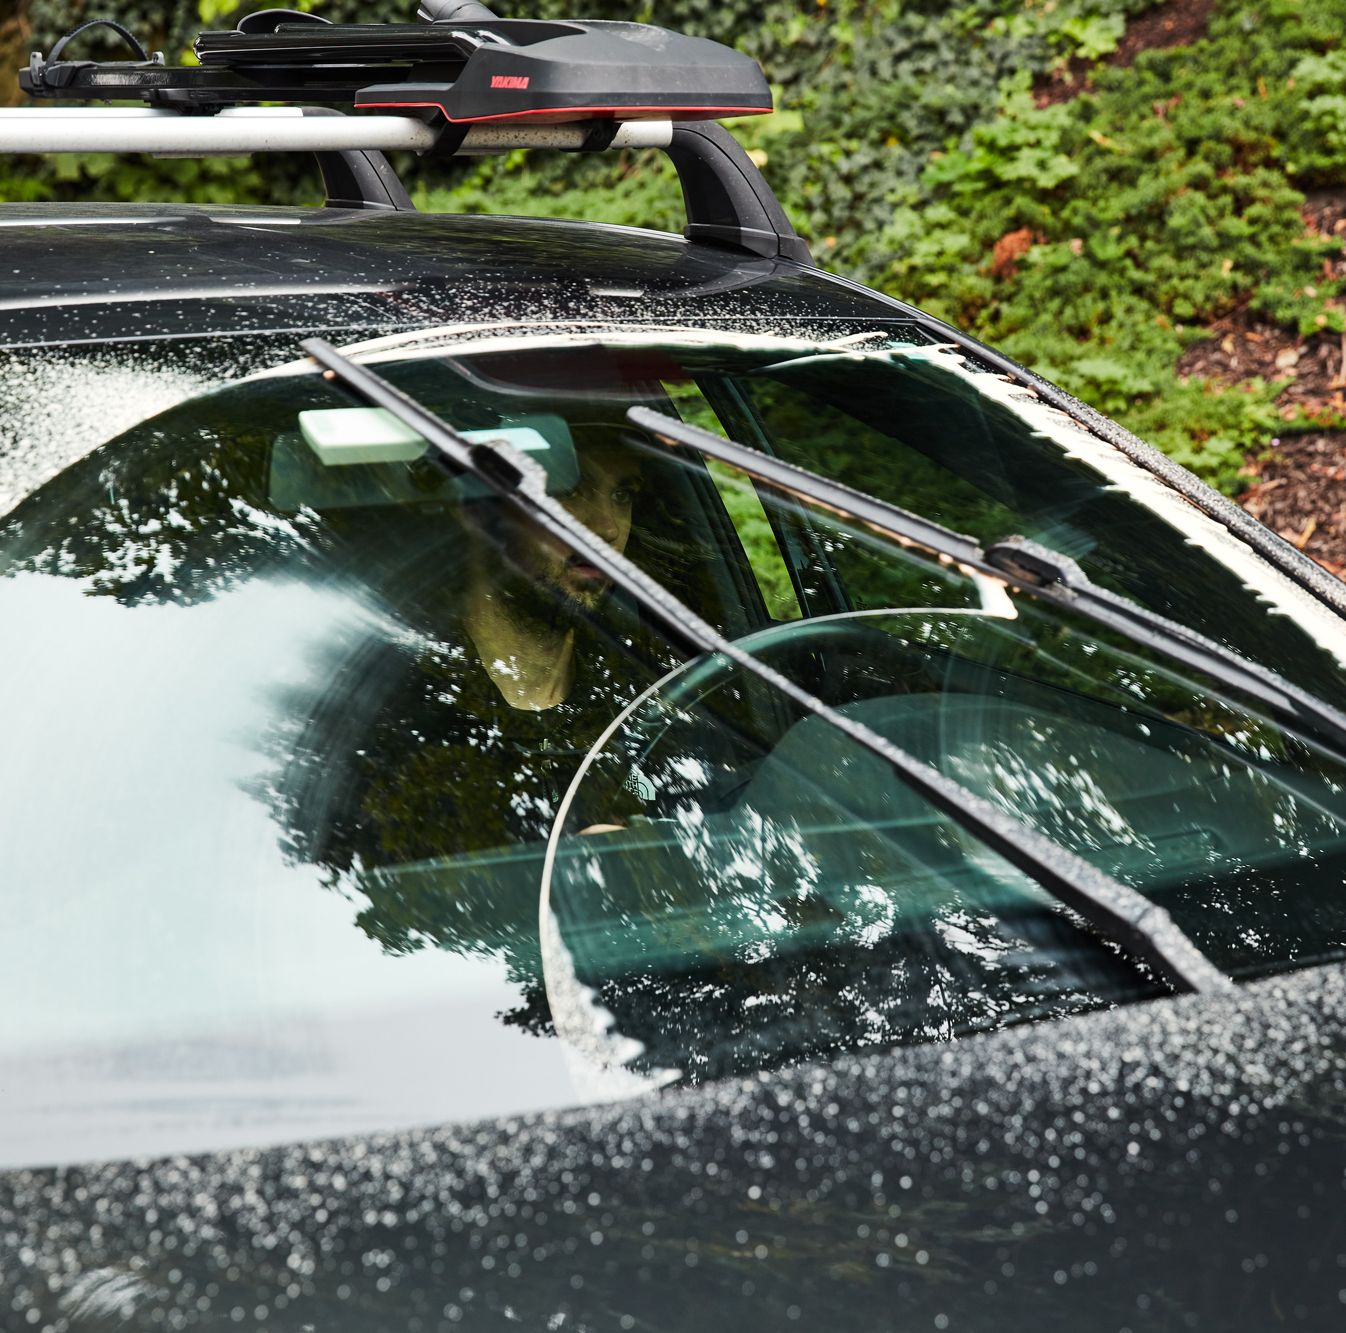 The Best Wiper Blades to Keep Your Windshield Clear